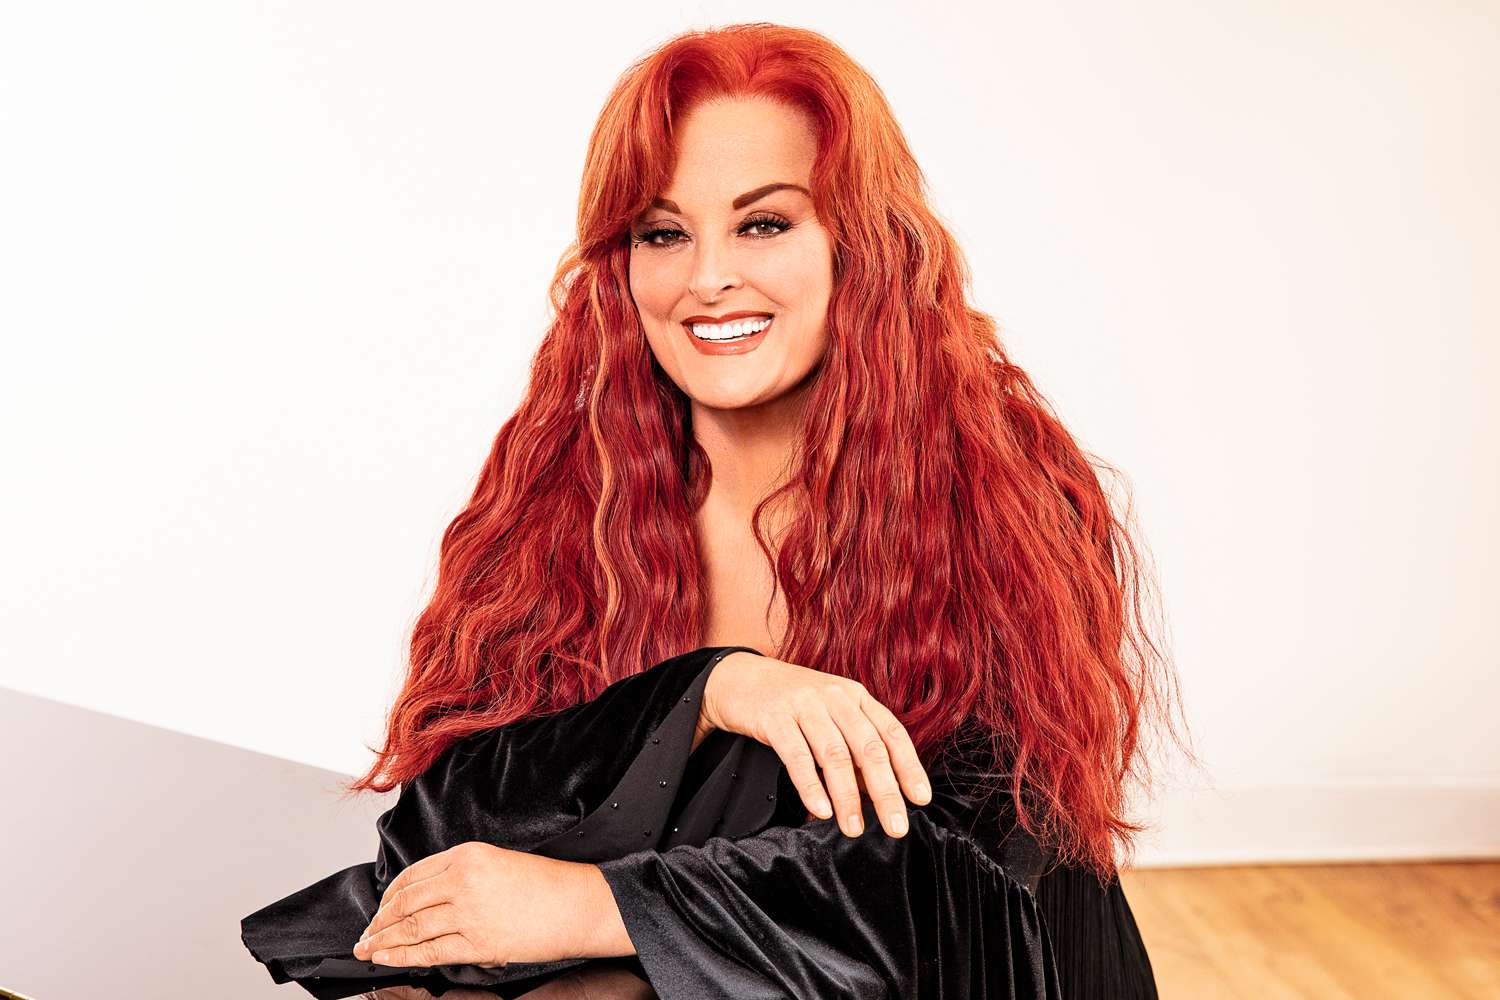 Wynonna Judd to Celebrate 'Milestone Year' with Upcoming 'Greatest Hits' Shows in Las Vegas